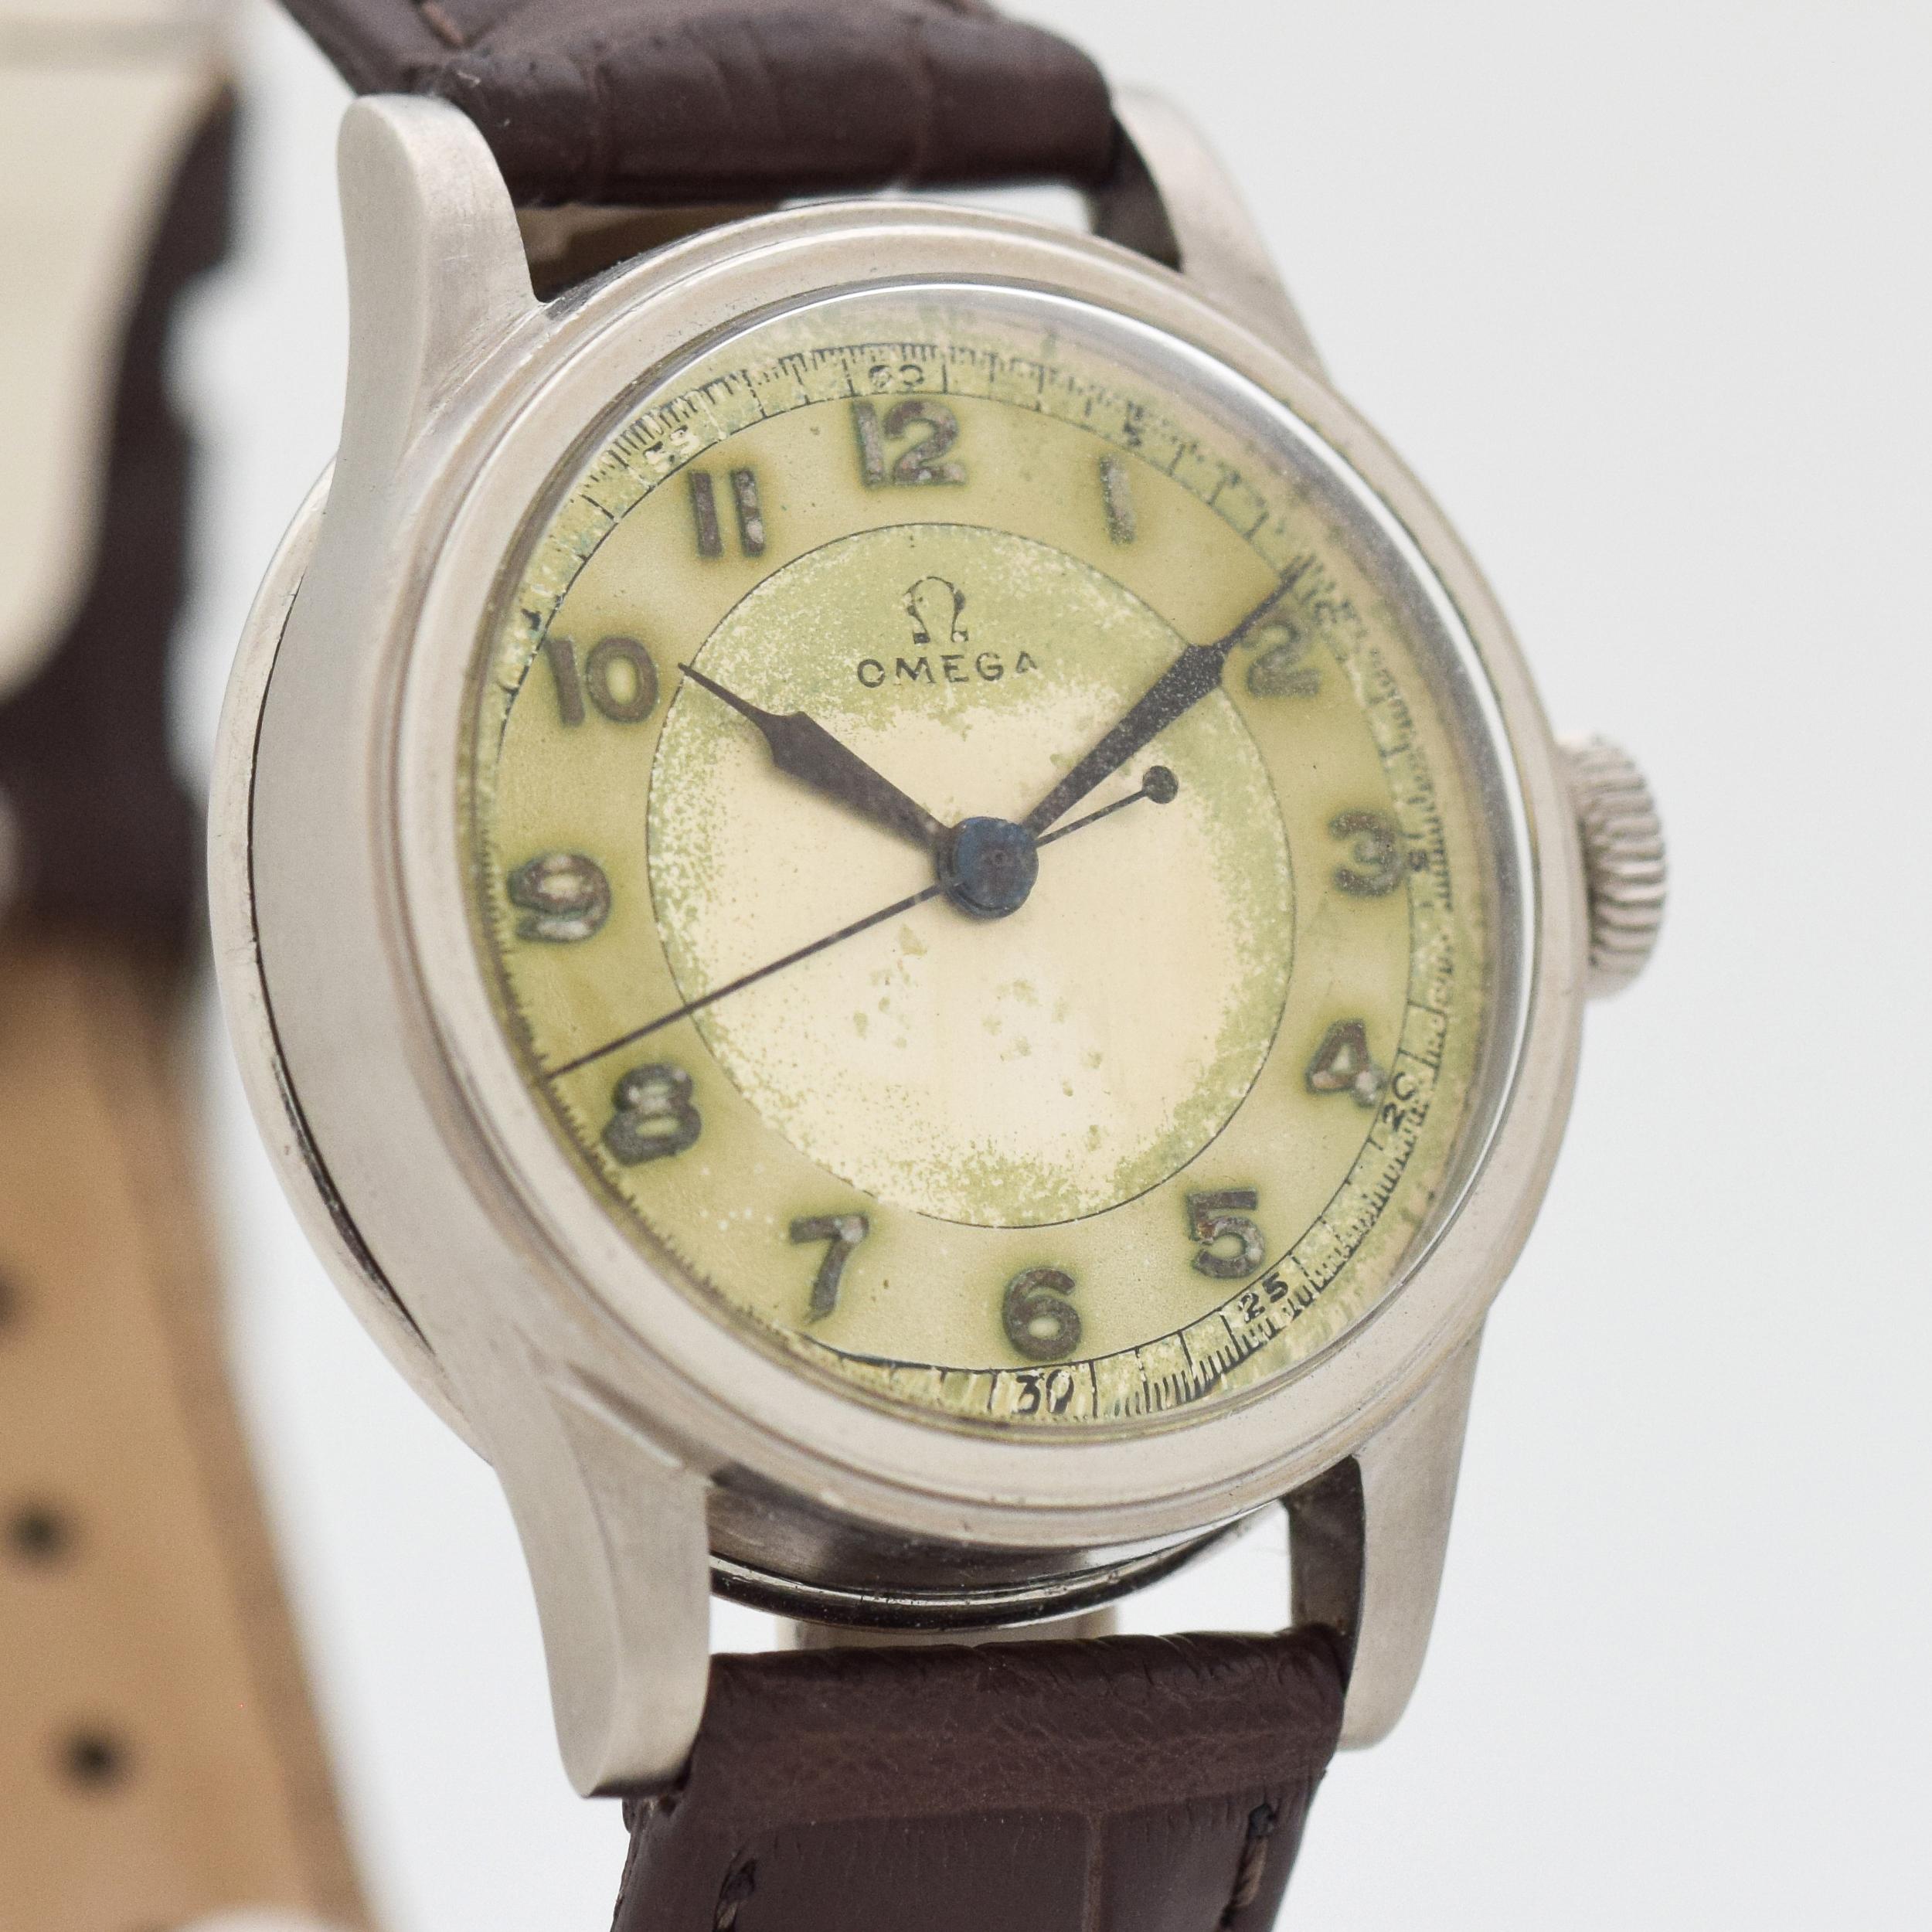 1938 Vintage Omega VERY EARLY Pre-WWII Military Stainless Steel watch with Original Heavy Patina Silver Dial with Applied Arabic Number. 31mm x 37mm lug to lug (1.22 in. x 1.46 in.) - 15 jewel, manual caliber movement. Triple Signed.
